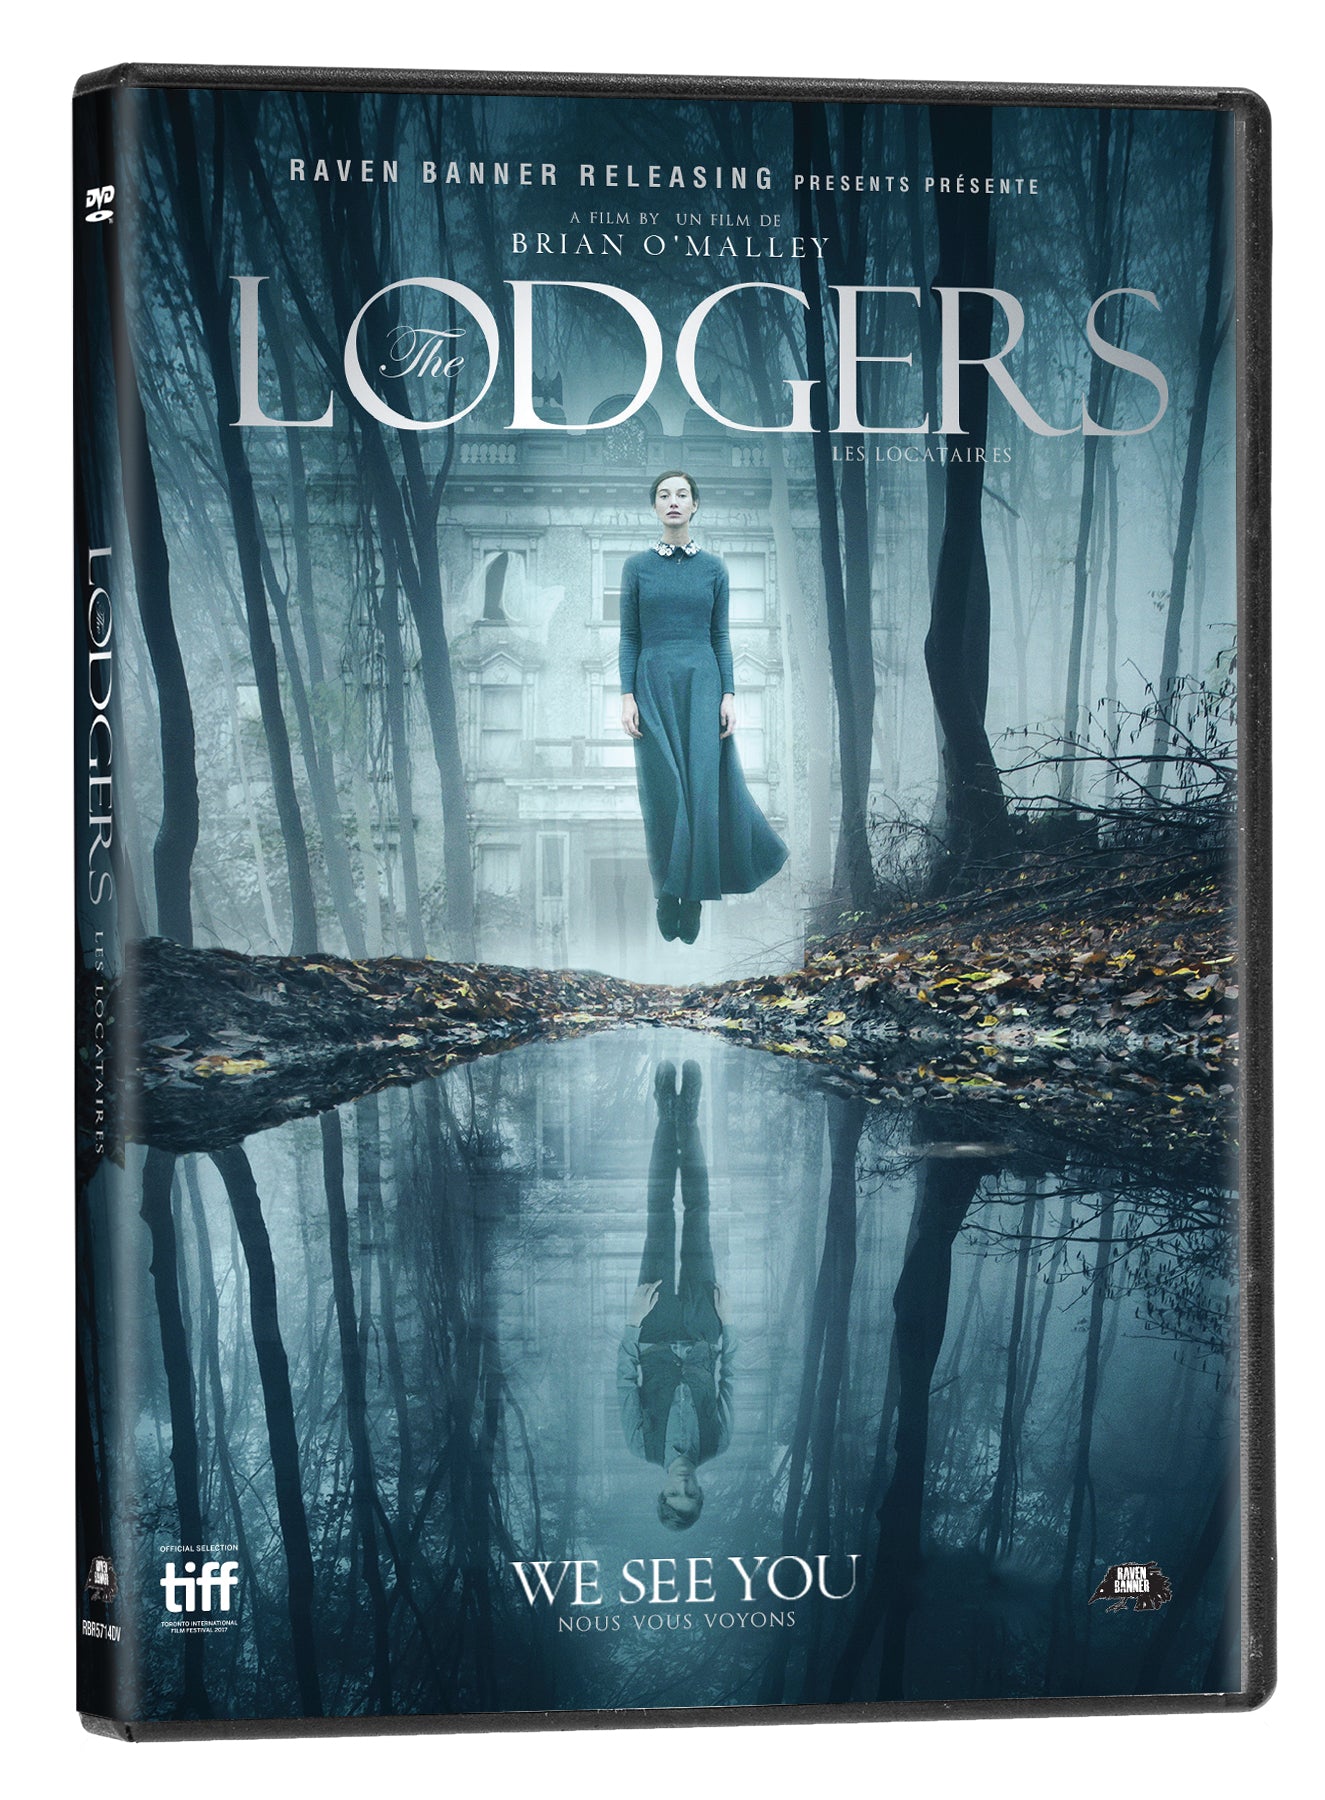 LODGERS, THE - DVD